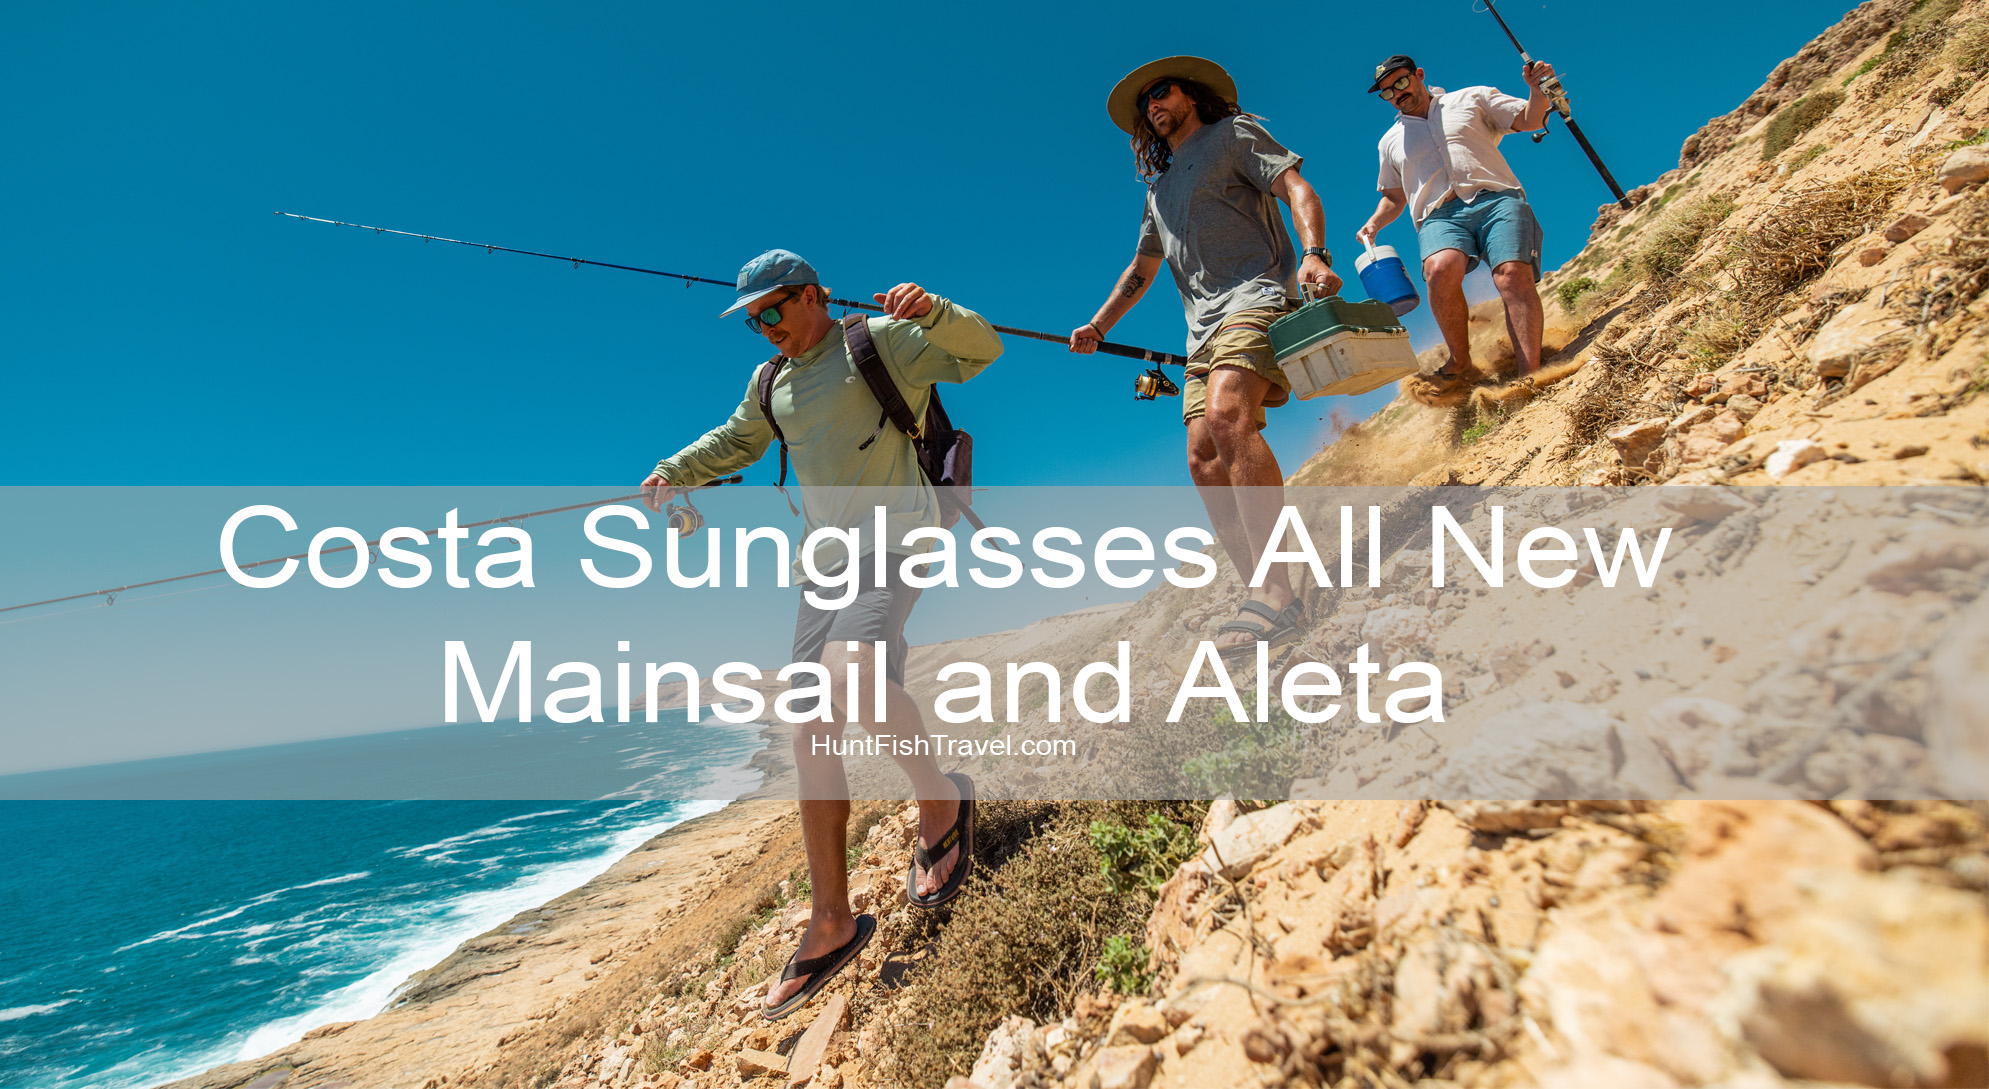 Costa Sunglasses grows its hybrid category with frames built for life on and off the water - Mainsail and Aleta